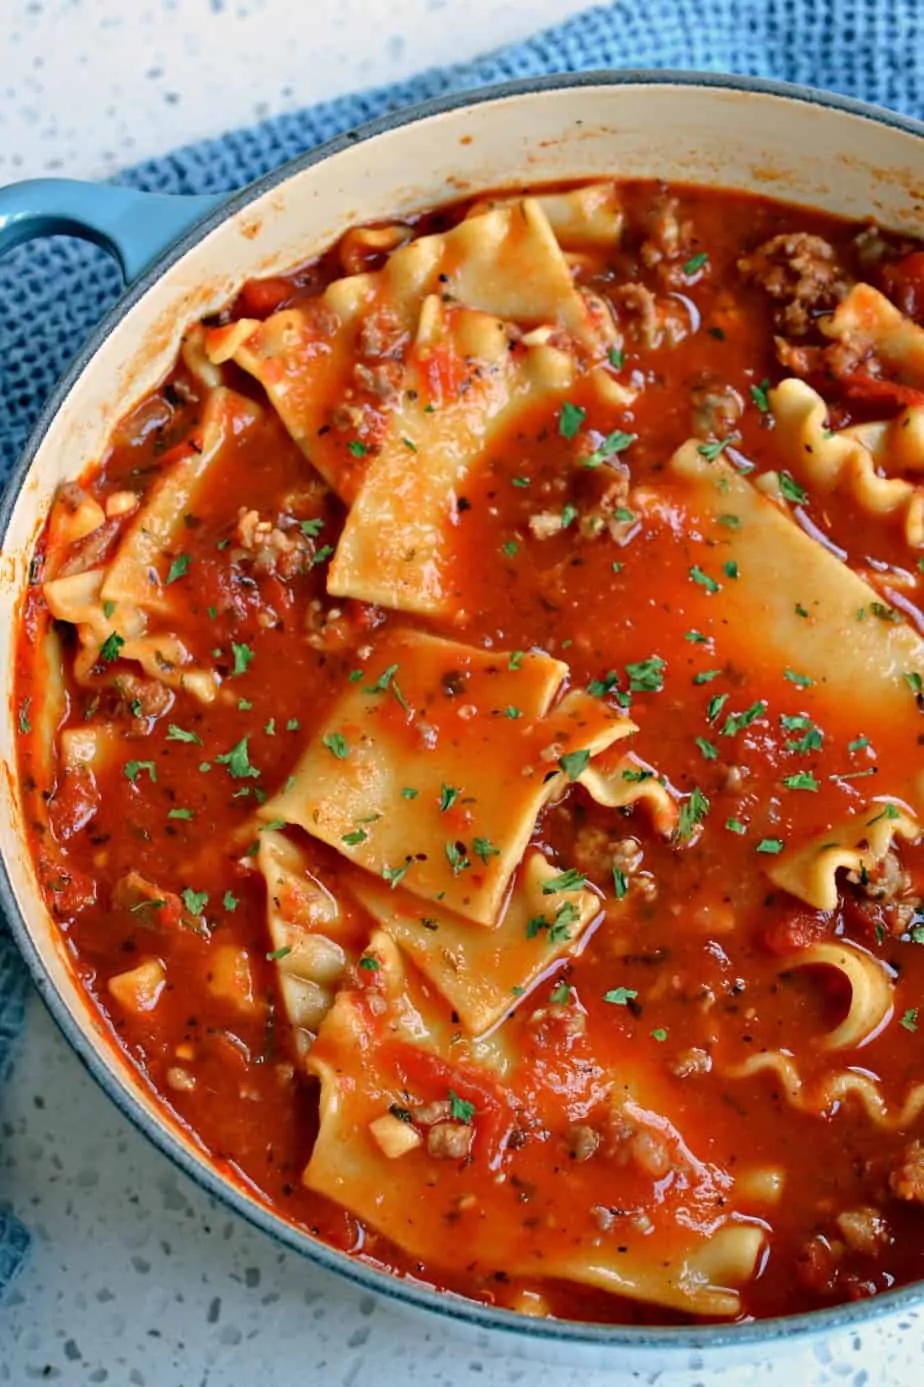 Lasagna Soup brings it all together with Italian Sausage, tomatoes, lasagna noodles and Italian spices all in one pot.